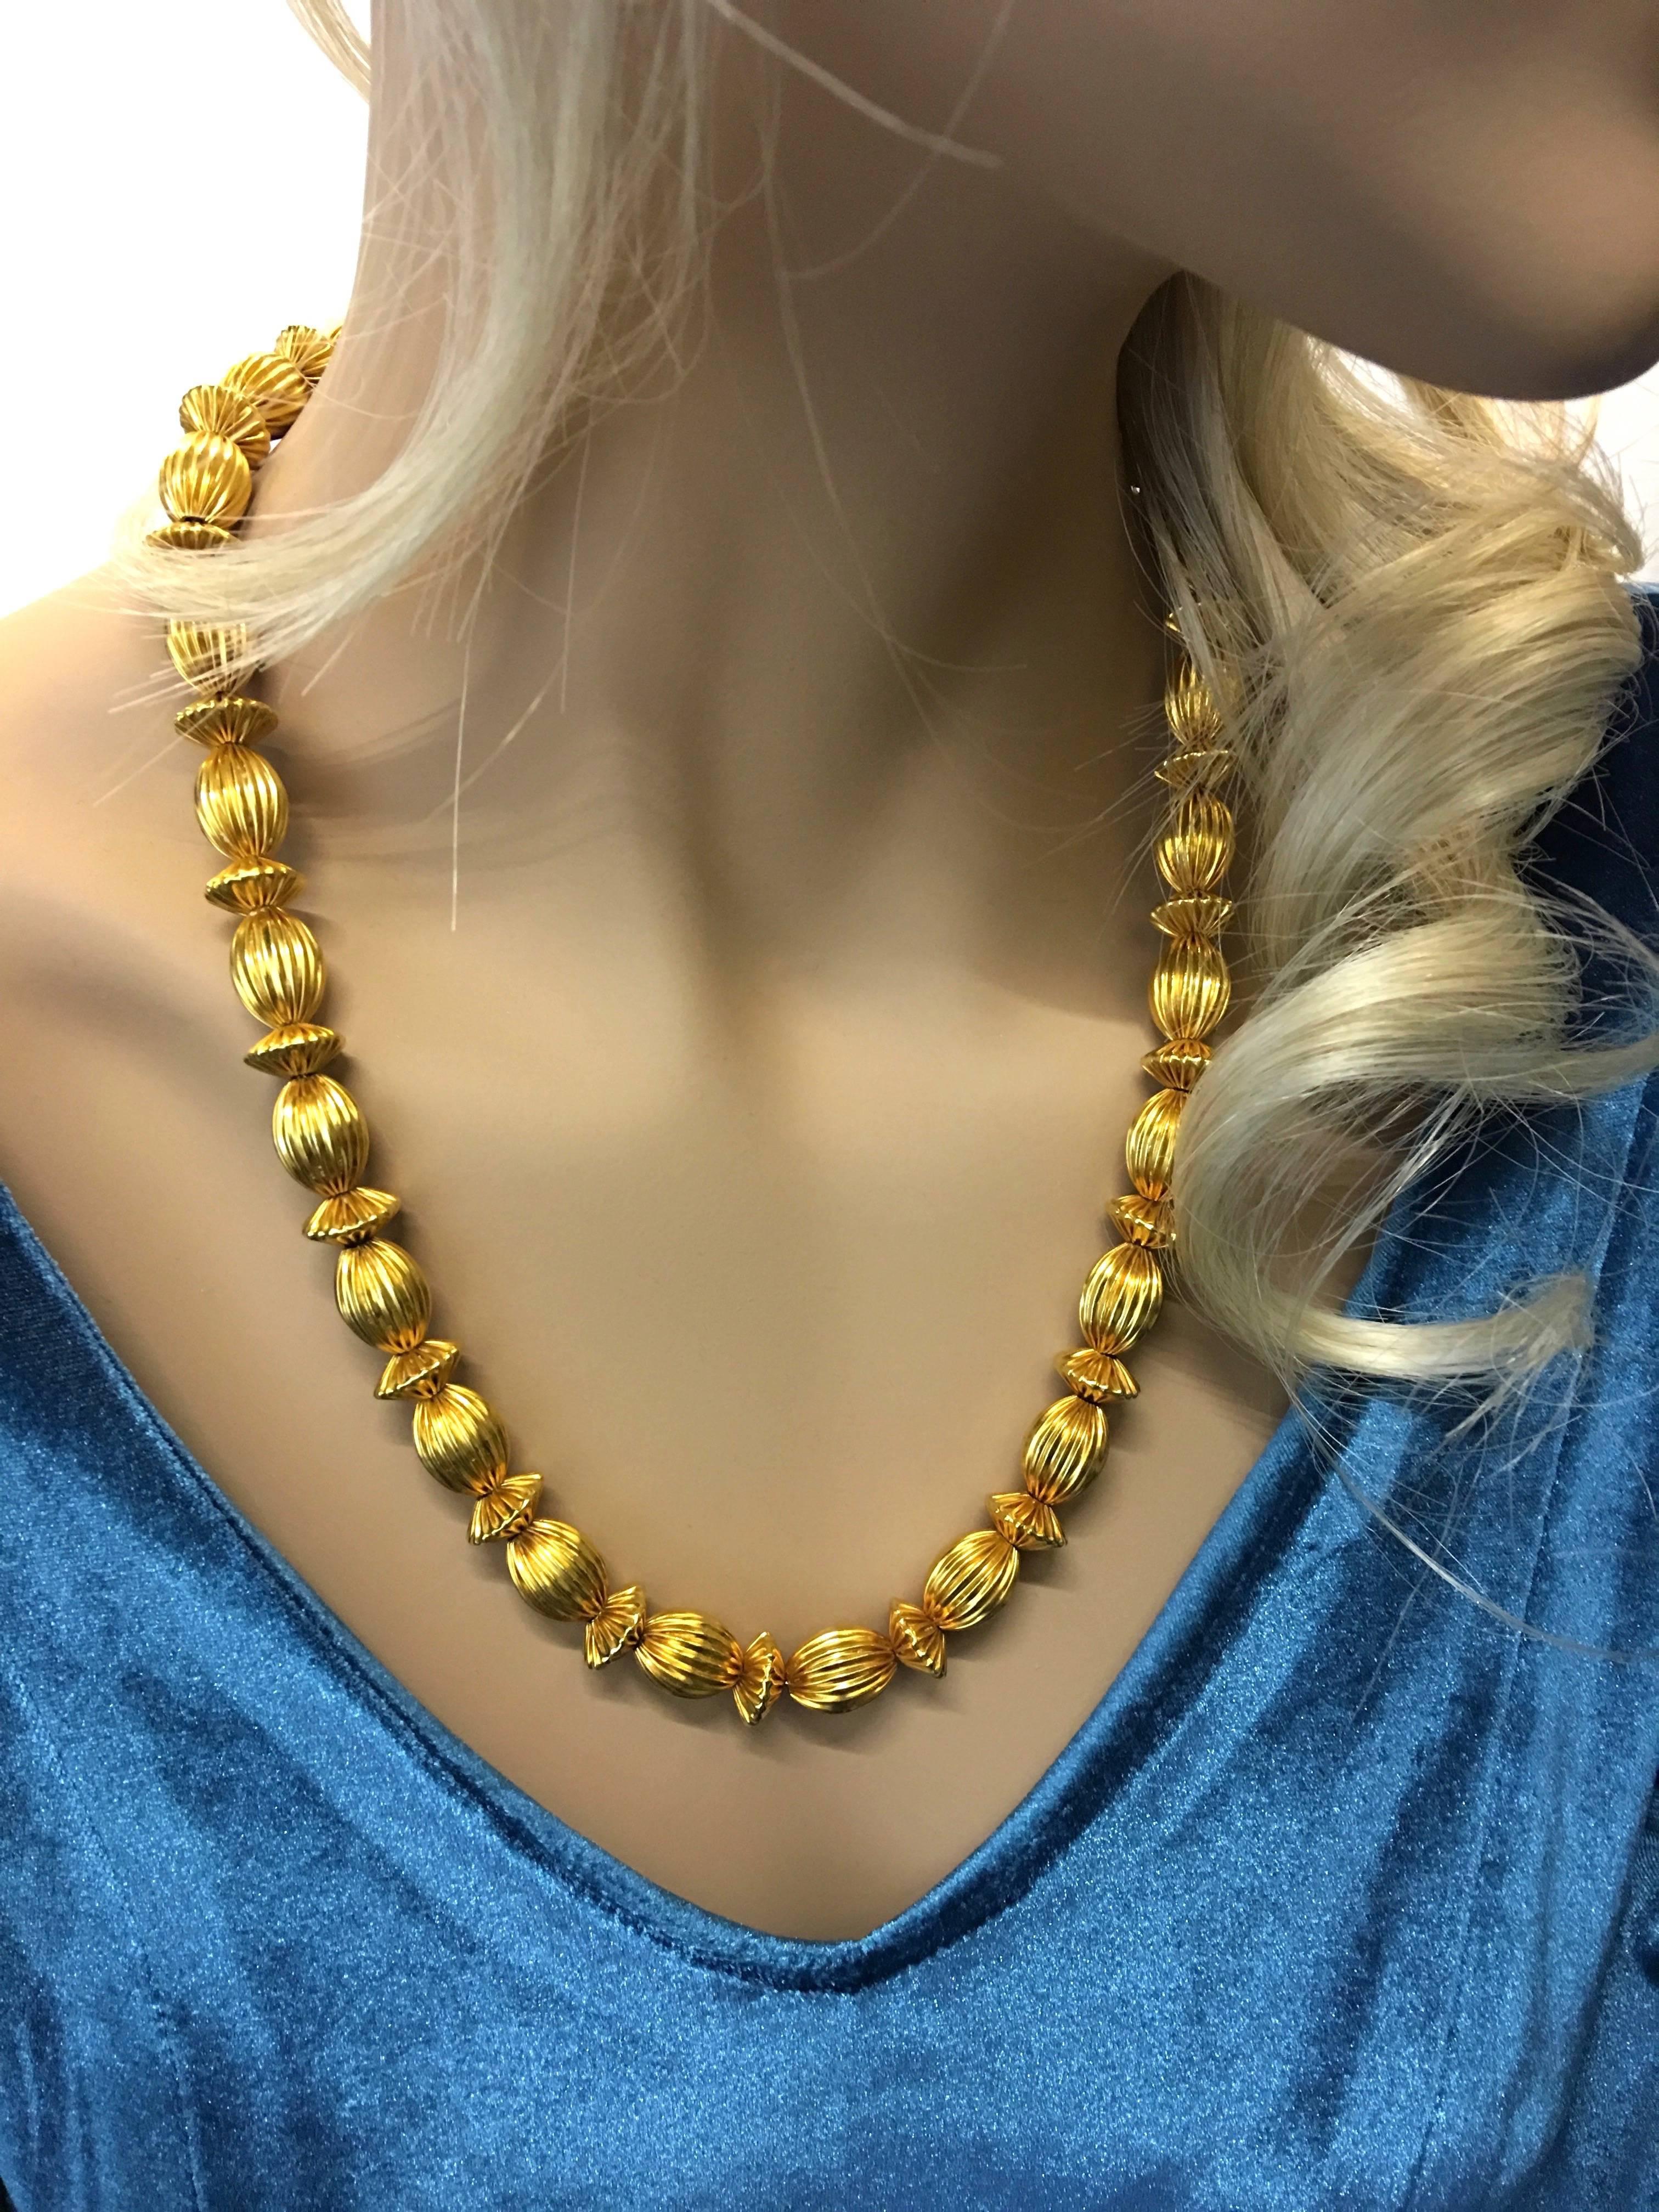 Alternating oval and saucer shaped fluted bead necklace by Ilias Lalaounis. Strung on gold foxtail chain. All yellow gold 18k 750.
Circa 1980.

Signed Ilias Lalaounis.
Marked: A21, Greece, 750, Maker's Mark.
Total length: 21.65 inches (55.00